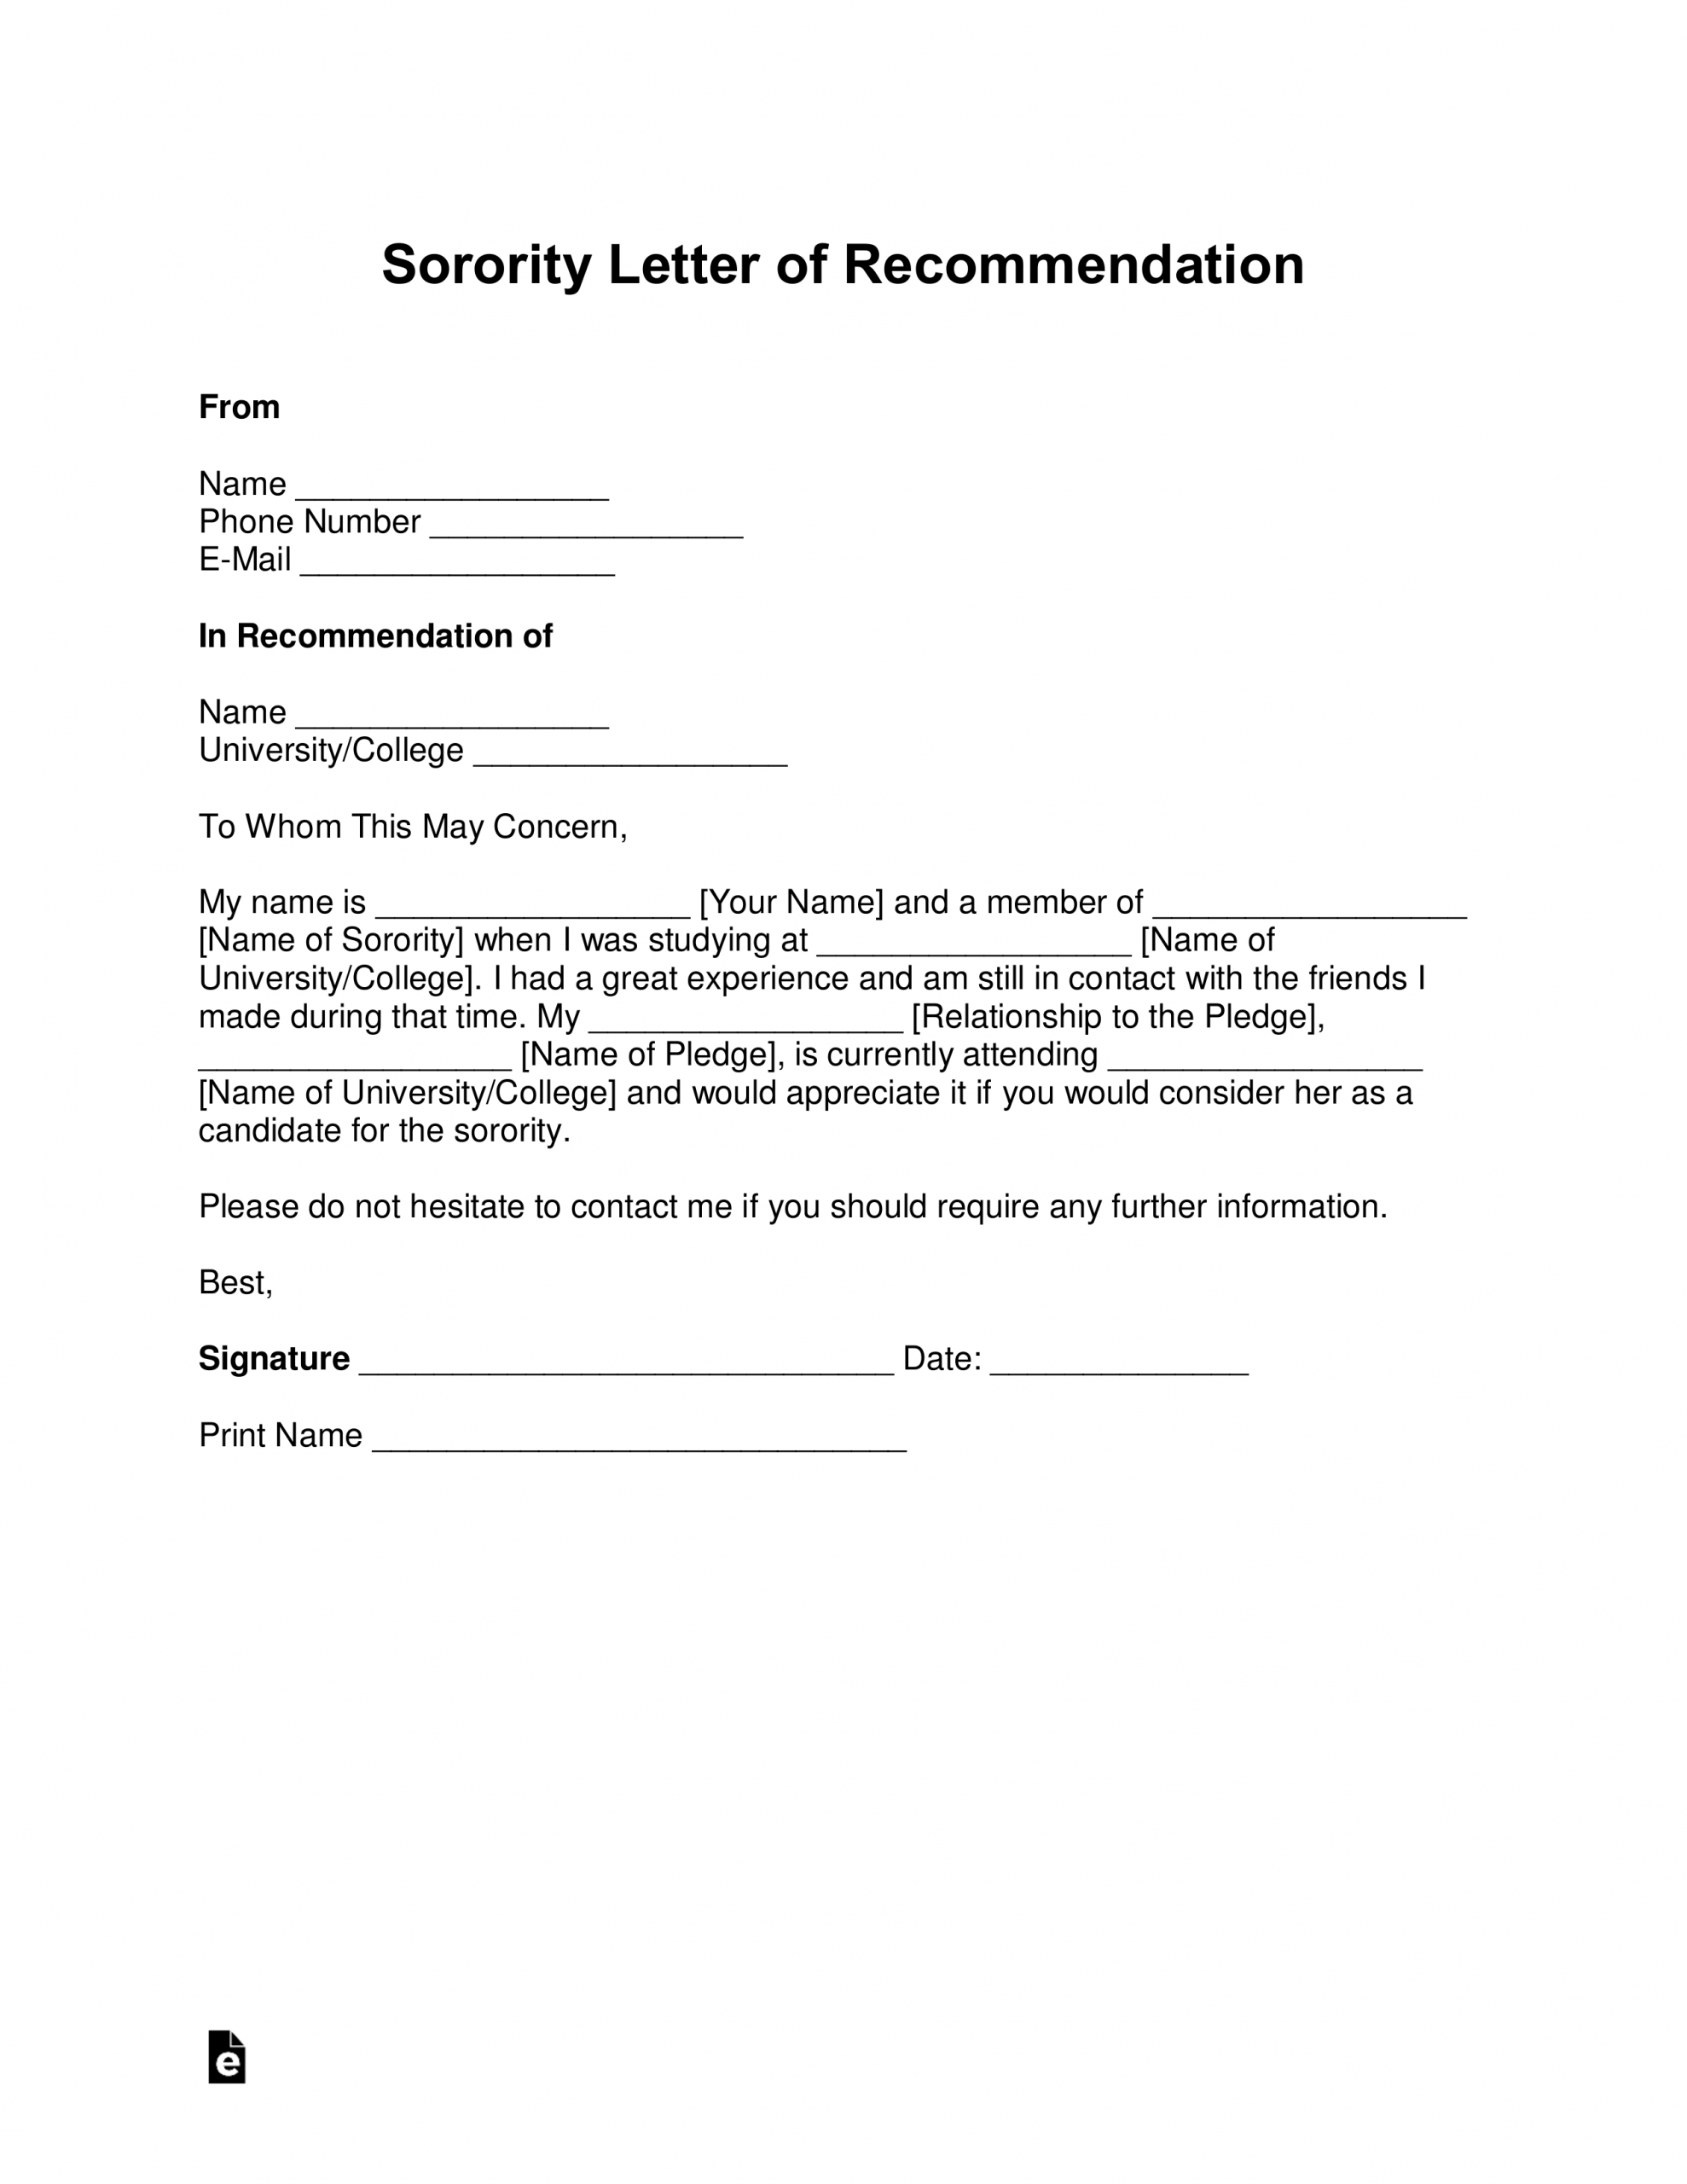 Free Sorority Recommendation Letter Template With Samples within size 2550 X 3301